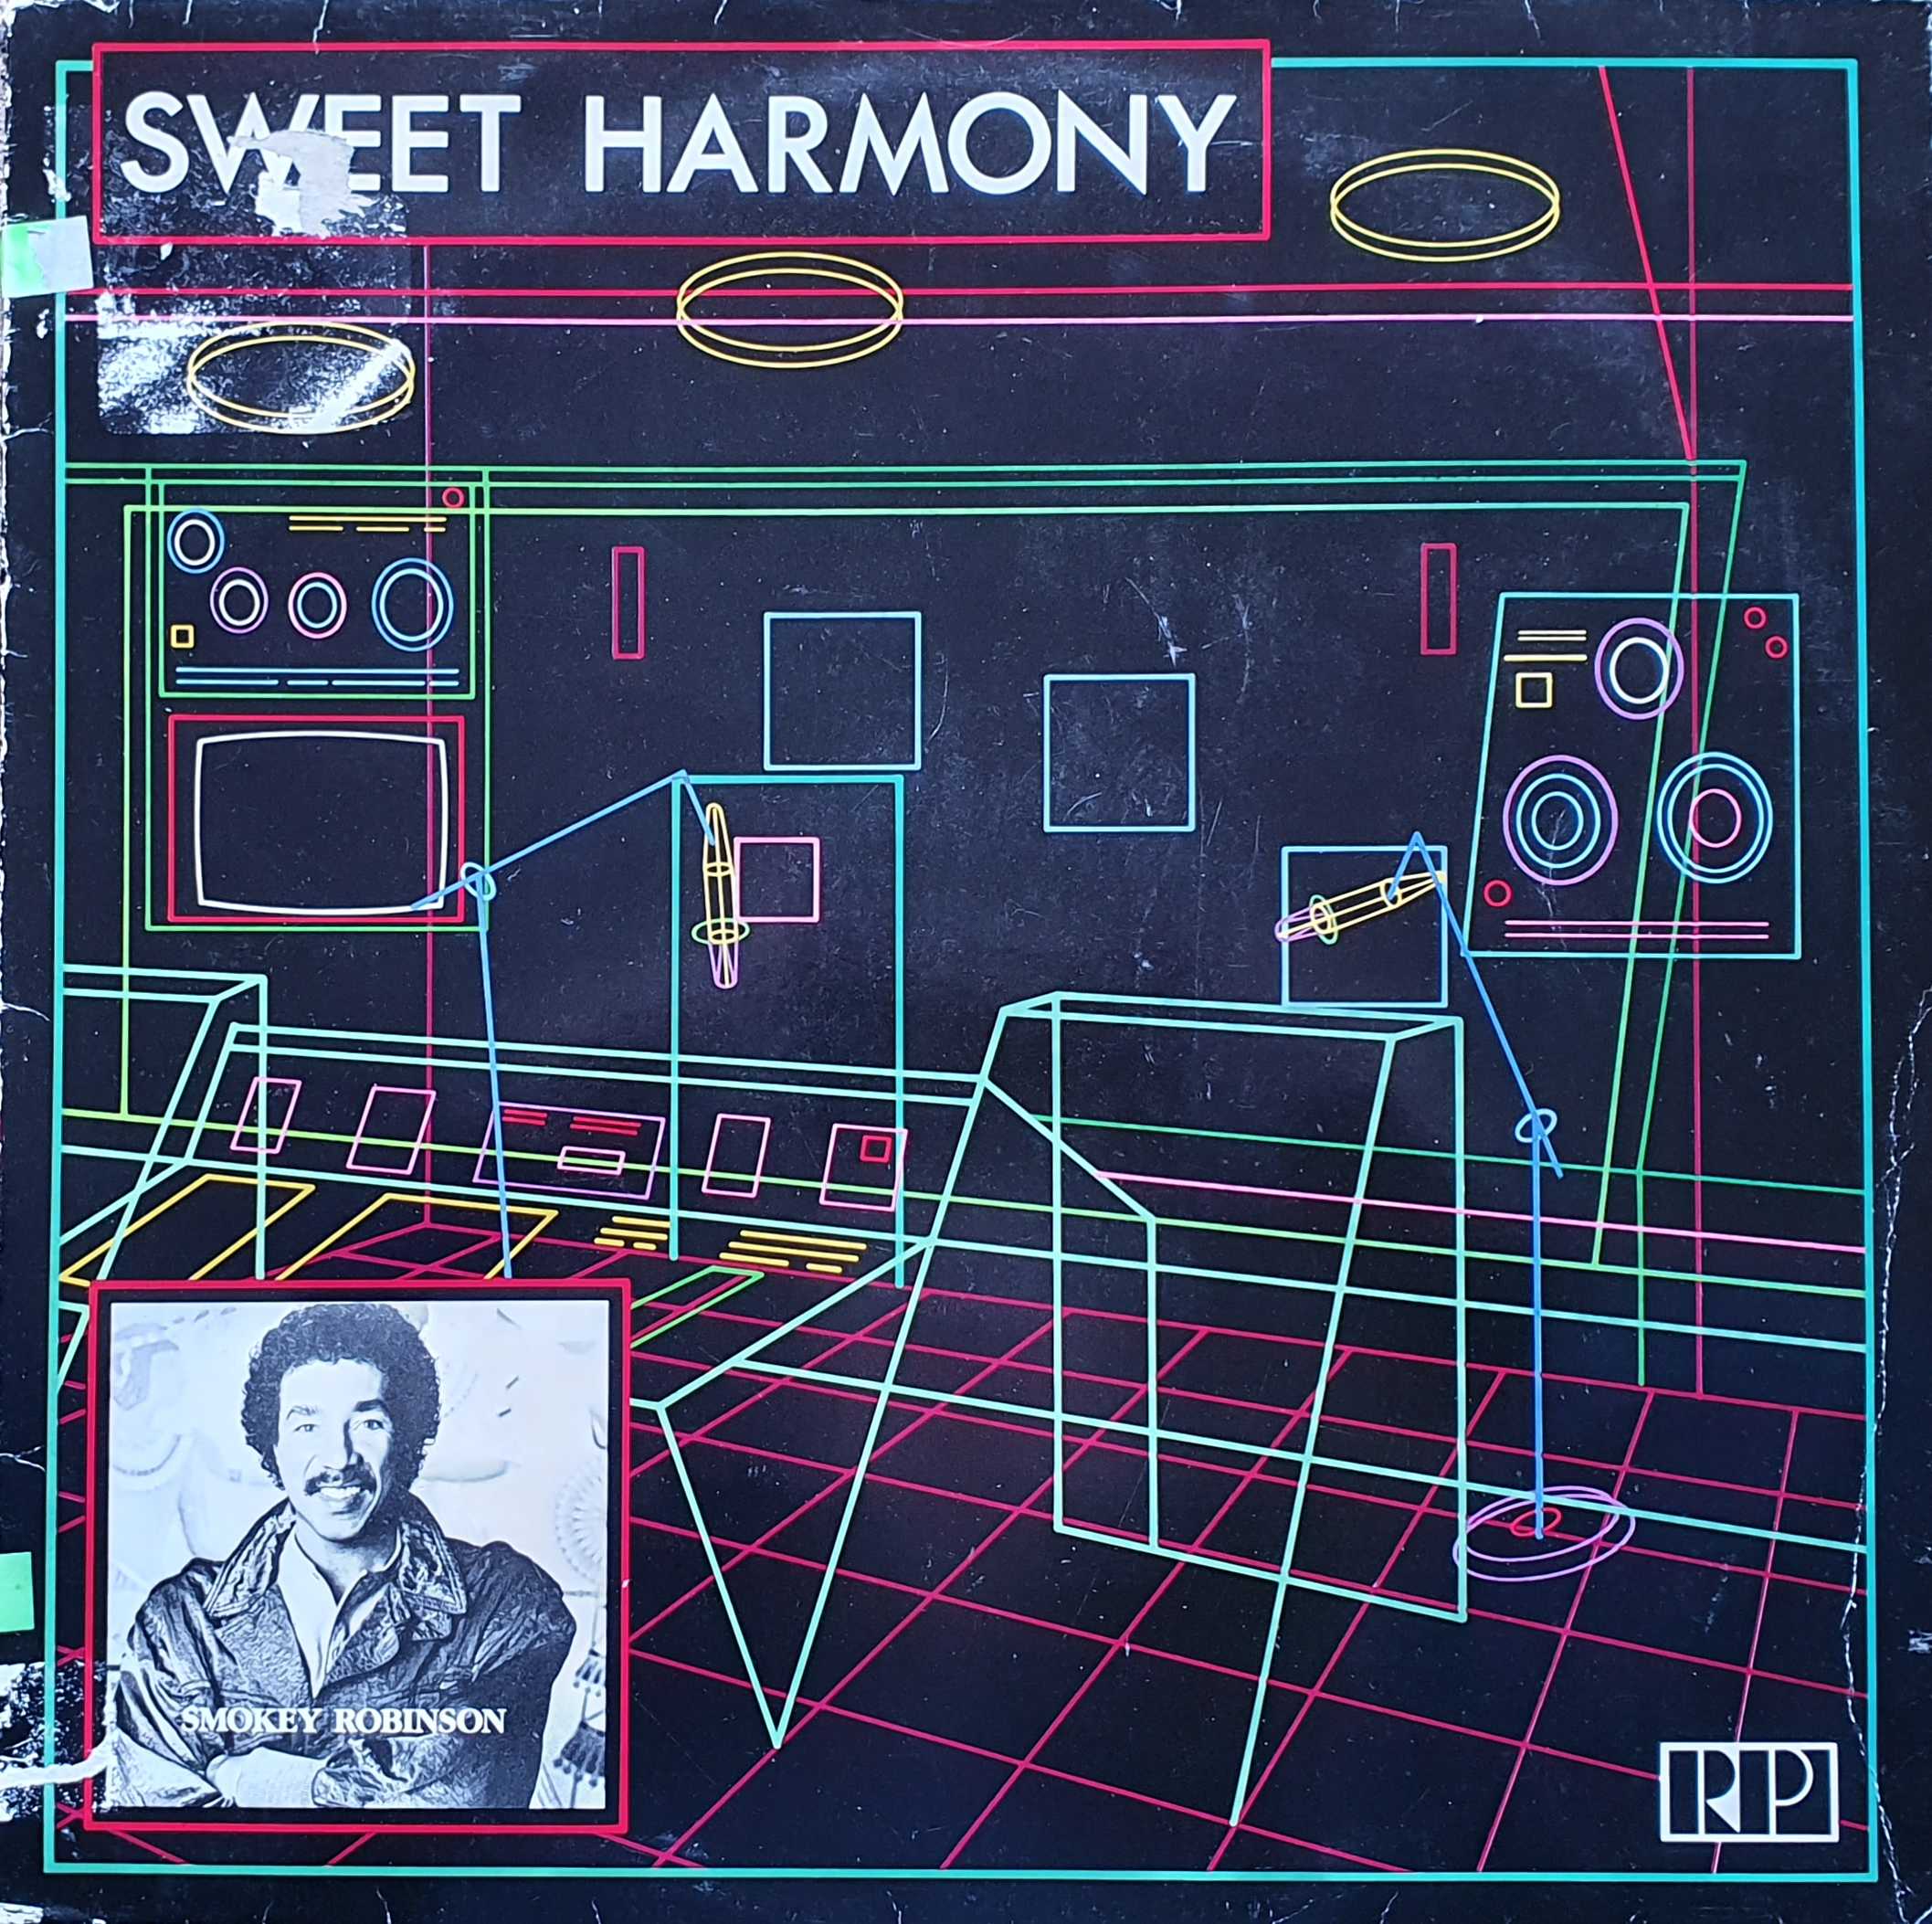 Picture of TAIR 86040 Sweet harmony by artist Smokey Robinson & the Miracles from the BBC records and Tapes library